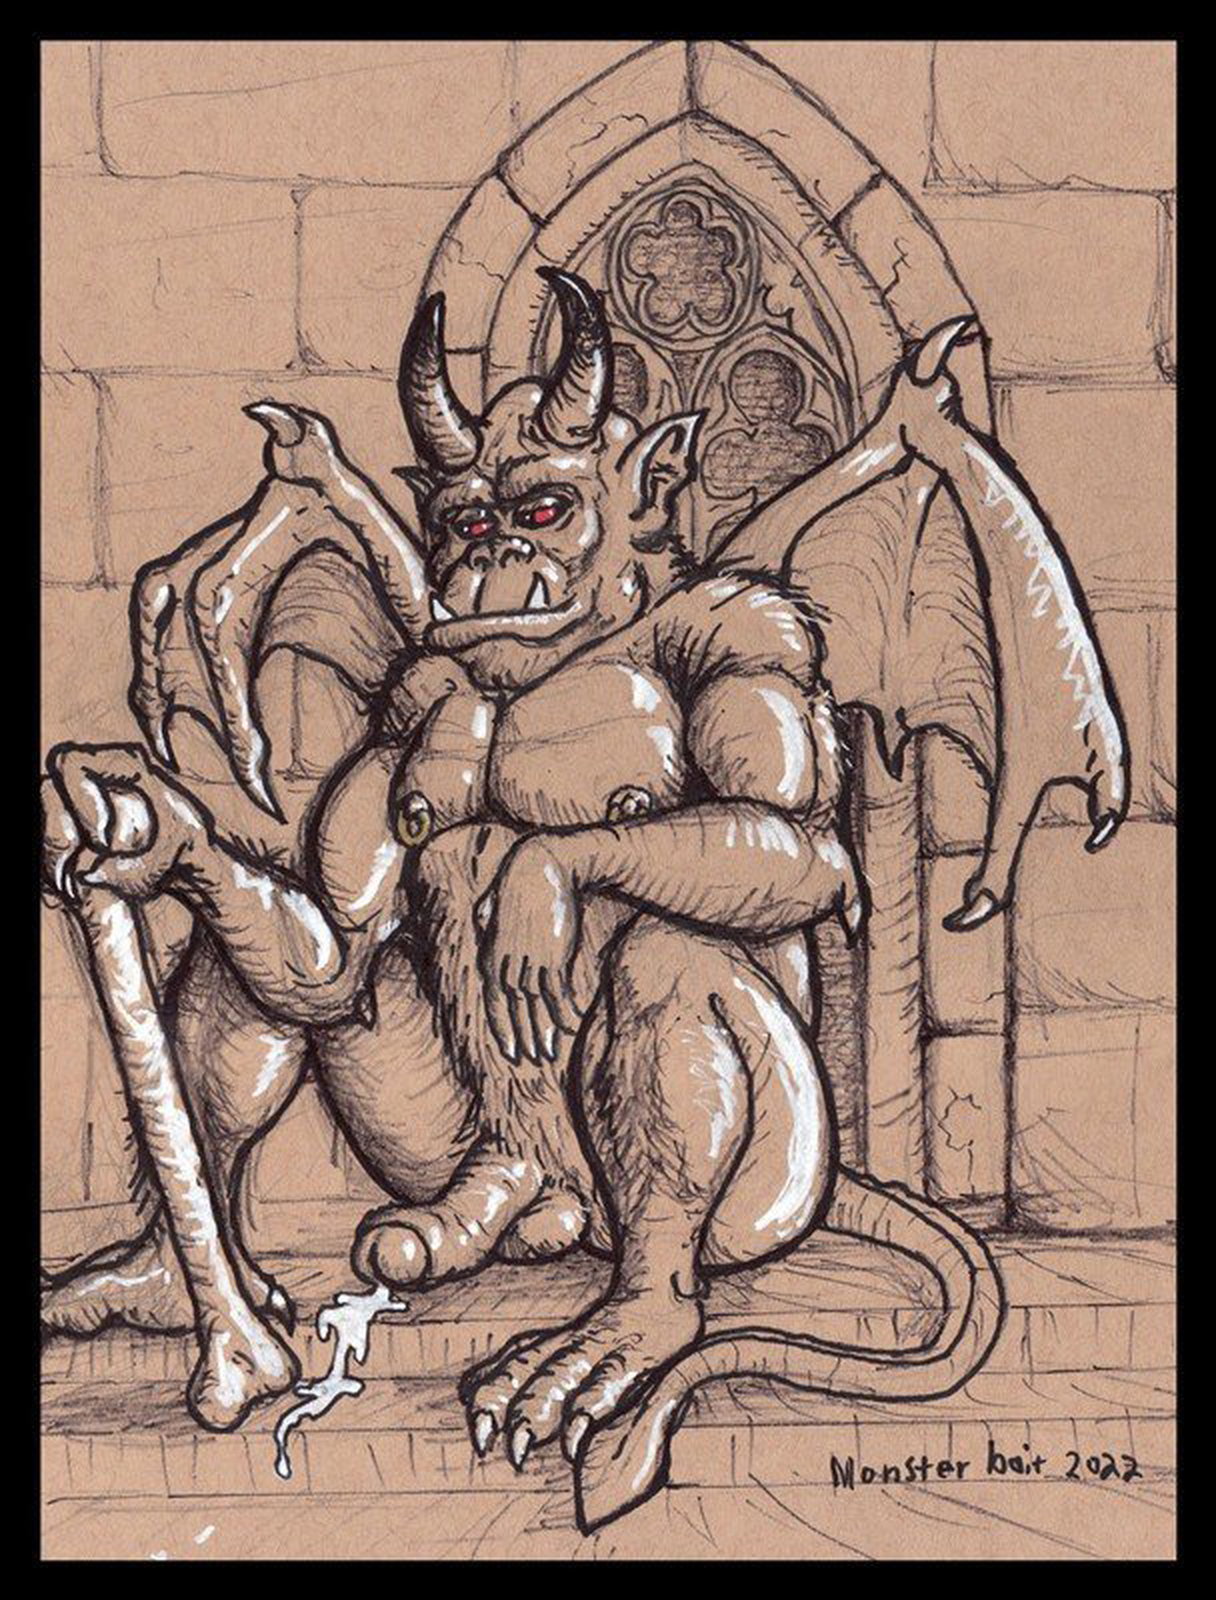 Photo by Monsterbait with the username @Monsterbait, who is a star user,  November 24, 2022 at 4:39 PM. The post is about the topic MonsterSex and the text says 'I am also doing erotic art like this demon Gargoyle piece that is over at CLAW LA Leather Getaway this weekend. 

#art #monster #erotica #eroticart #demon'